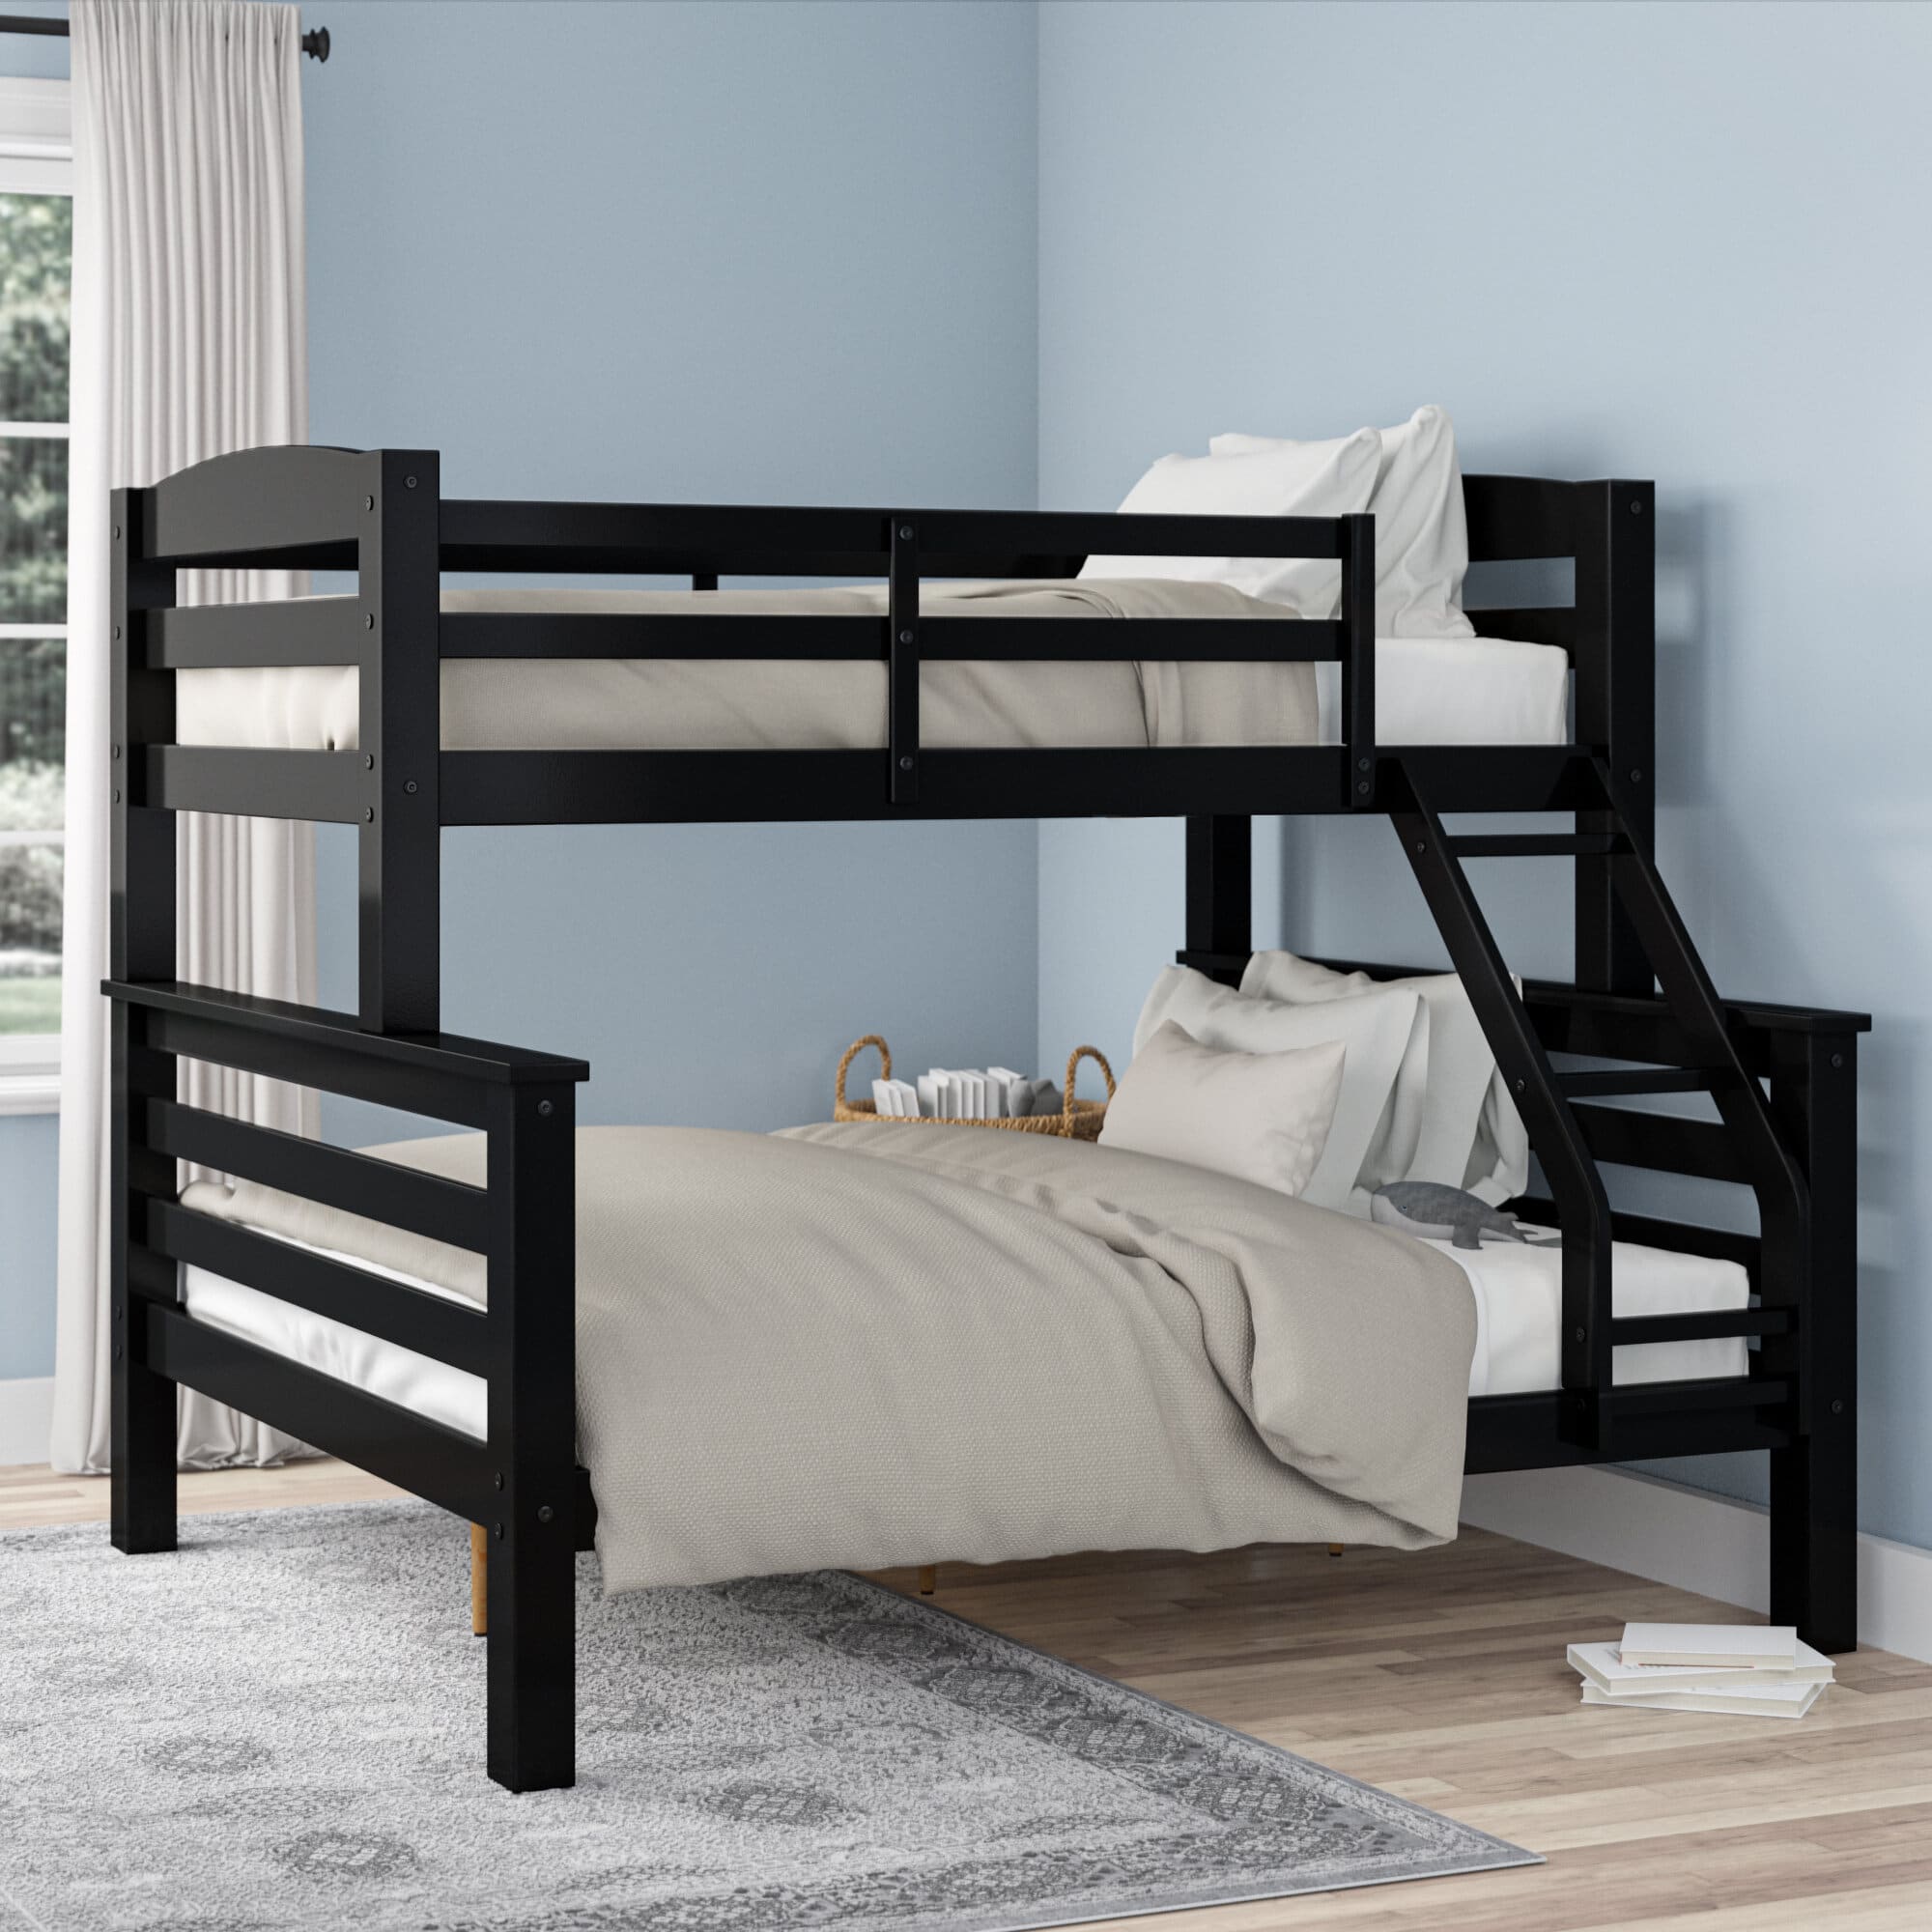 6 Best Twin Over Full Bunk Beds May, Twin Over Full Bunk Bed